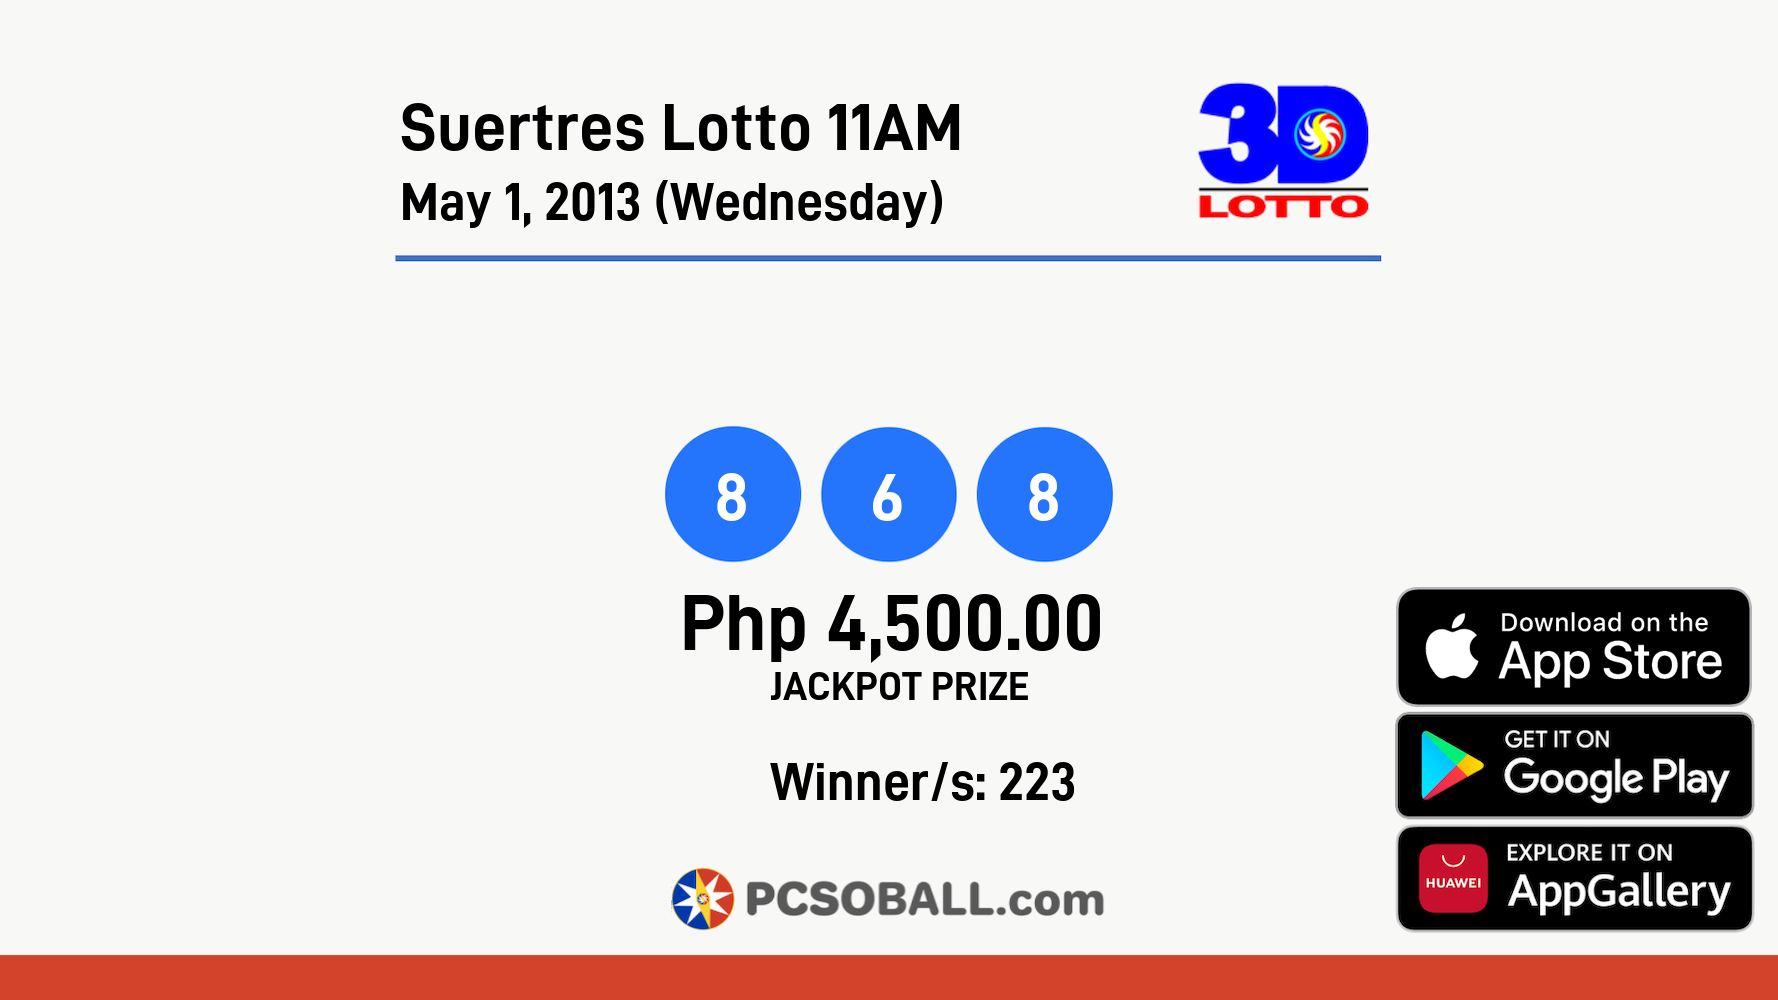 Suertres Lotto 11AM May 1, 2013 (Wednesday) Result